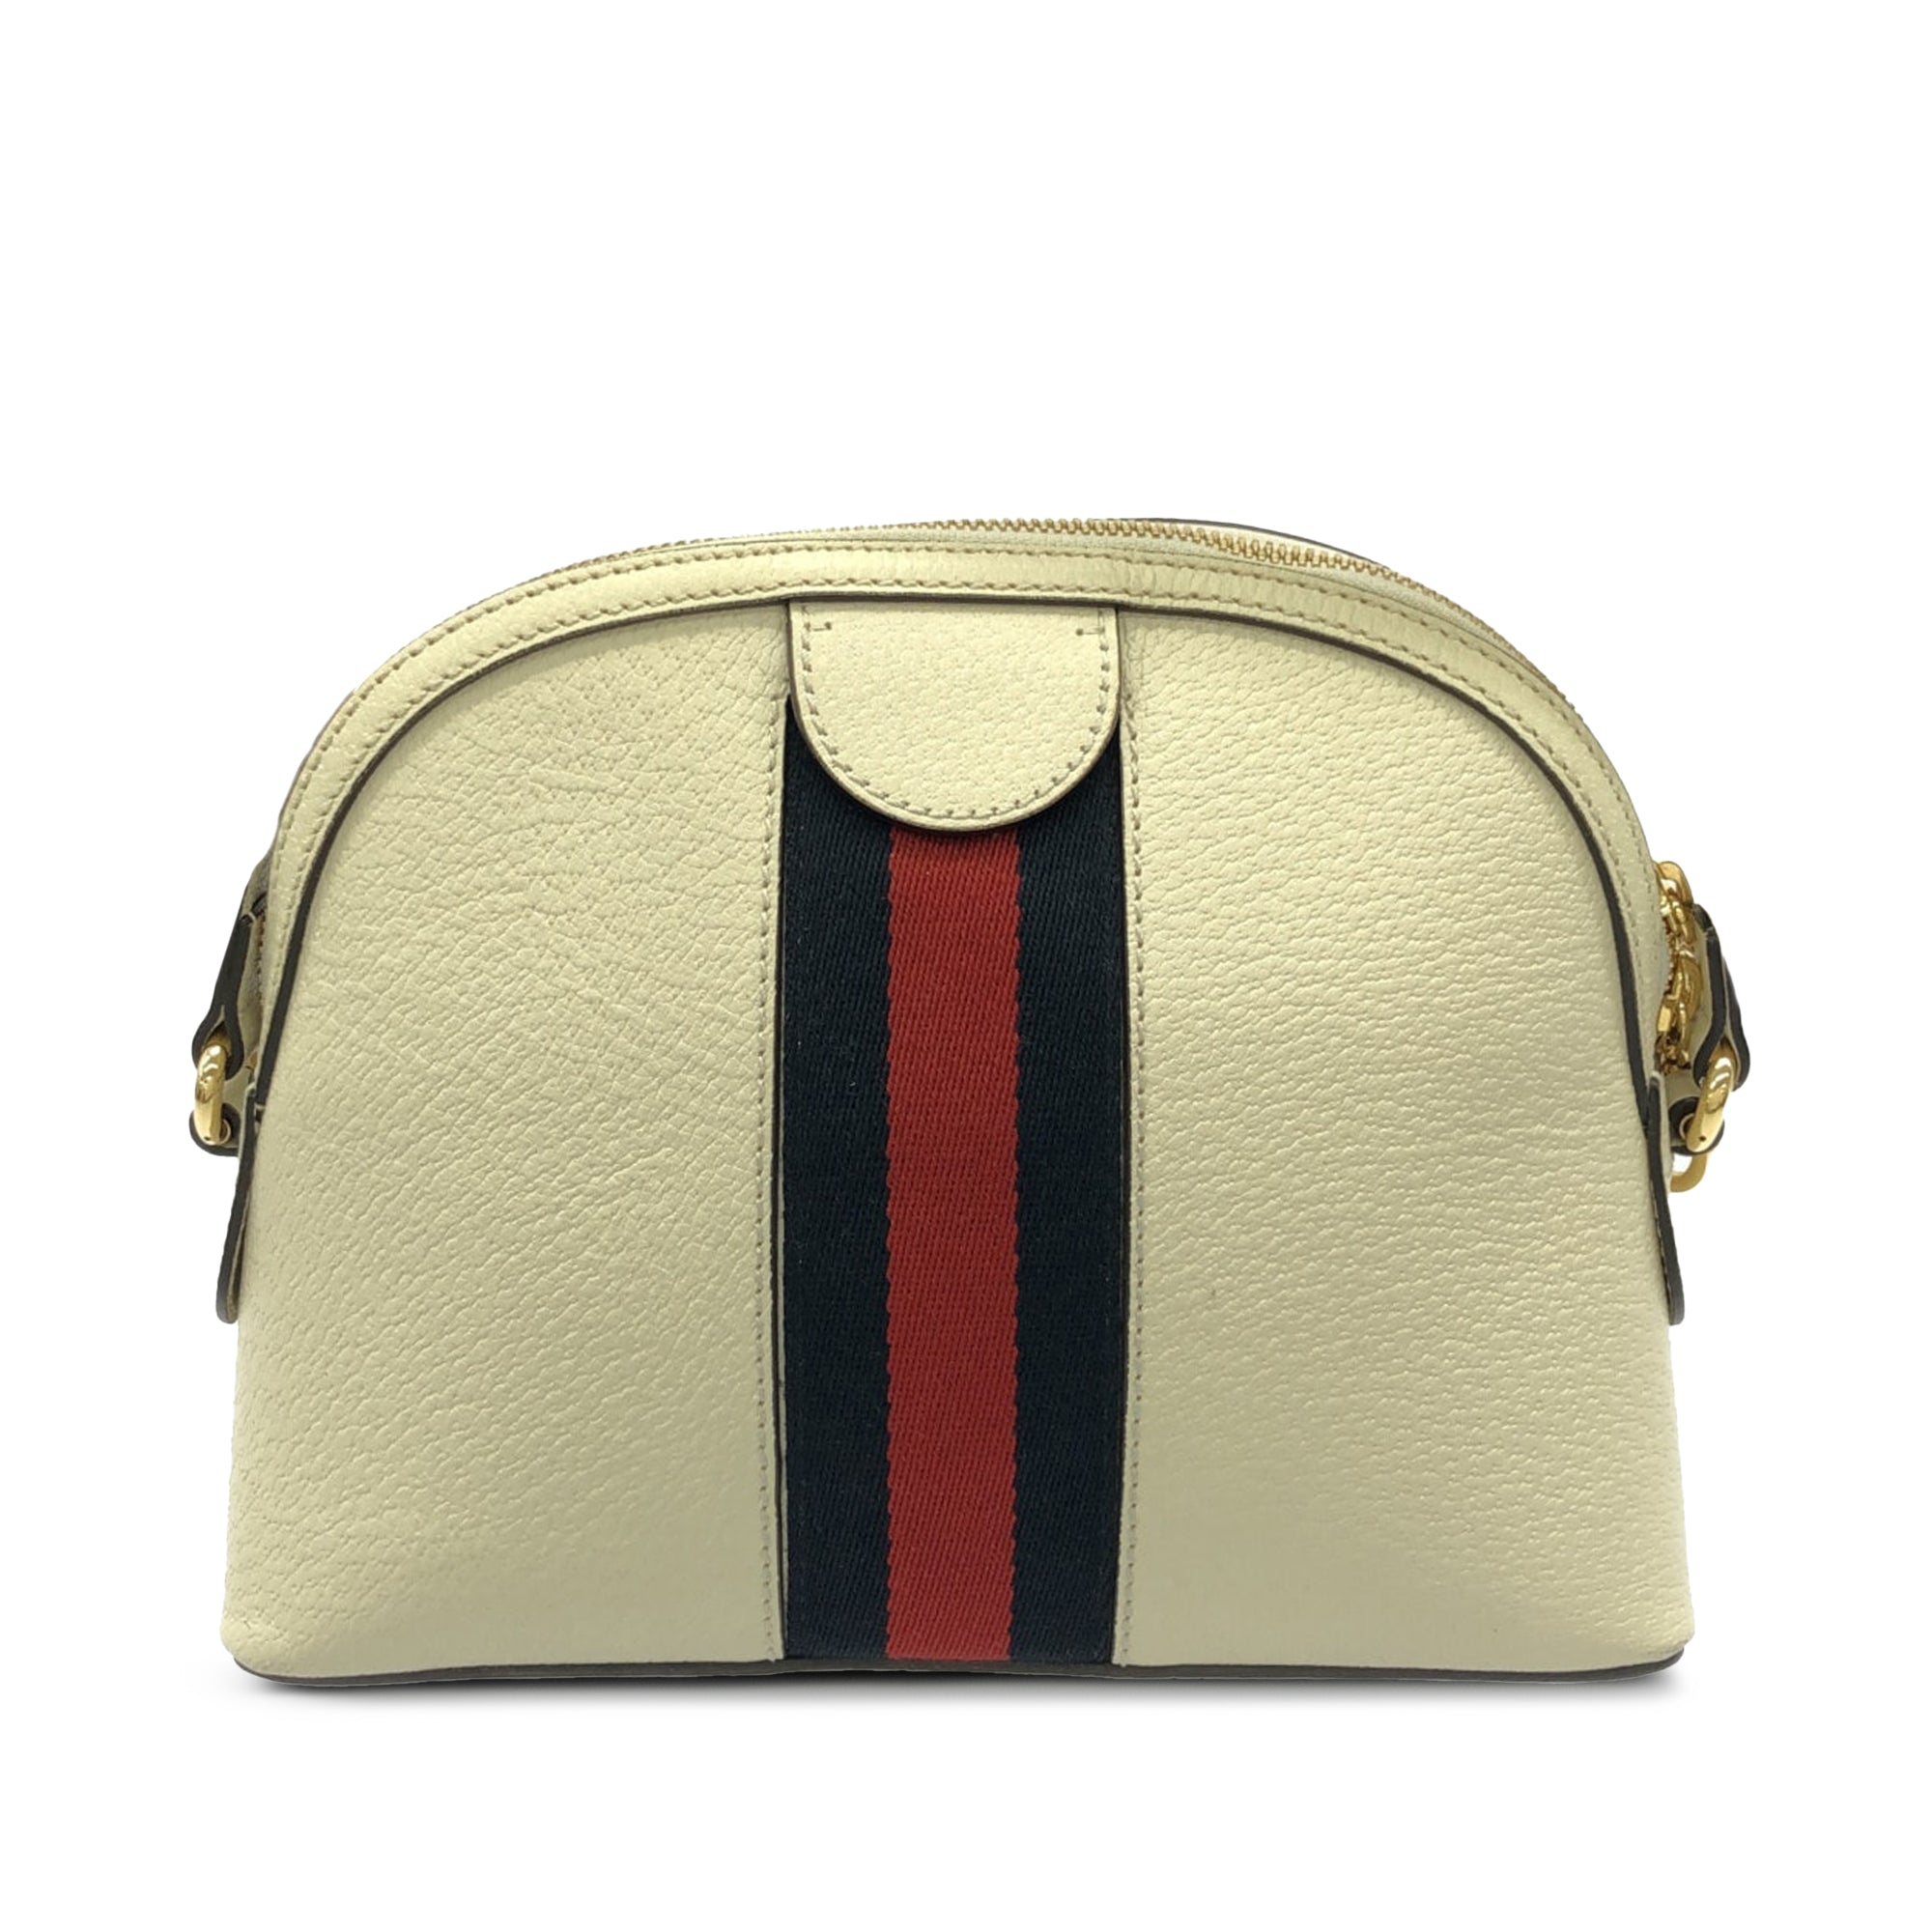 Buy online Gucci In Pakistan| Rs 9000 | Best Price | find the best quality  of Hand Bags, Handbag, Ladies Bags, Side Bags, Clutches, Leather Bags, Purse,  Fashion Bags, Tote Bags, Branded